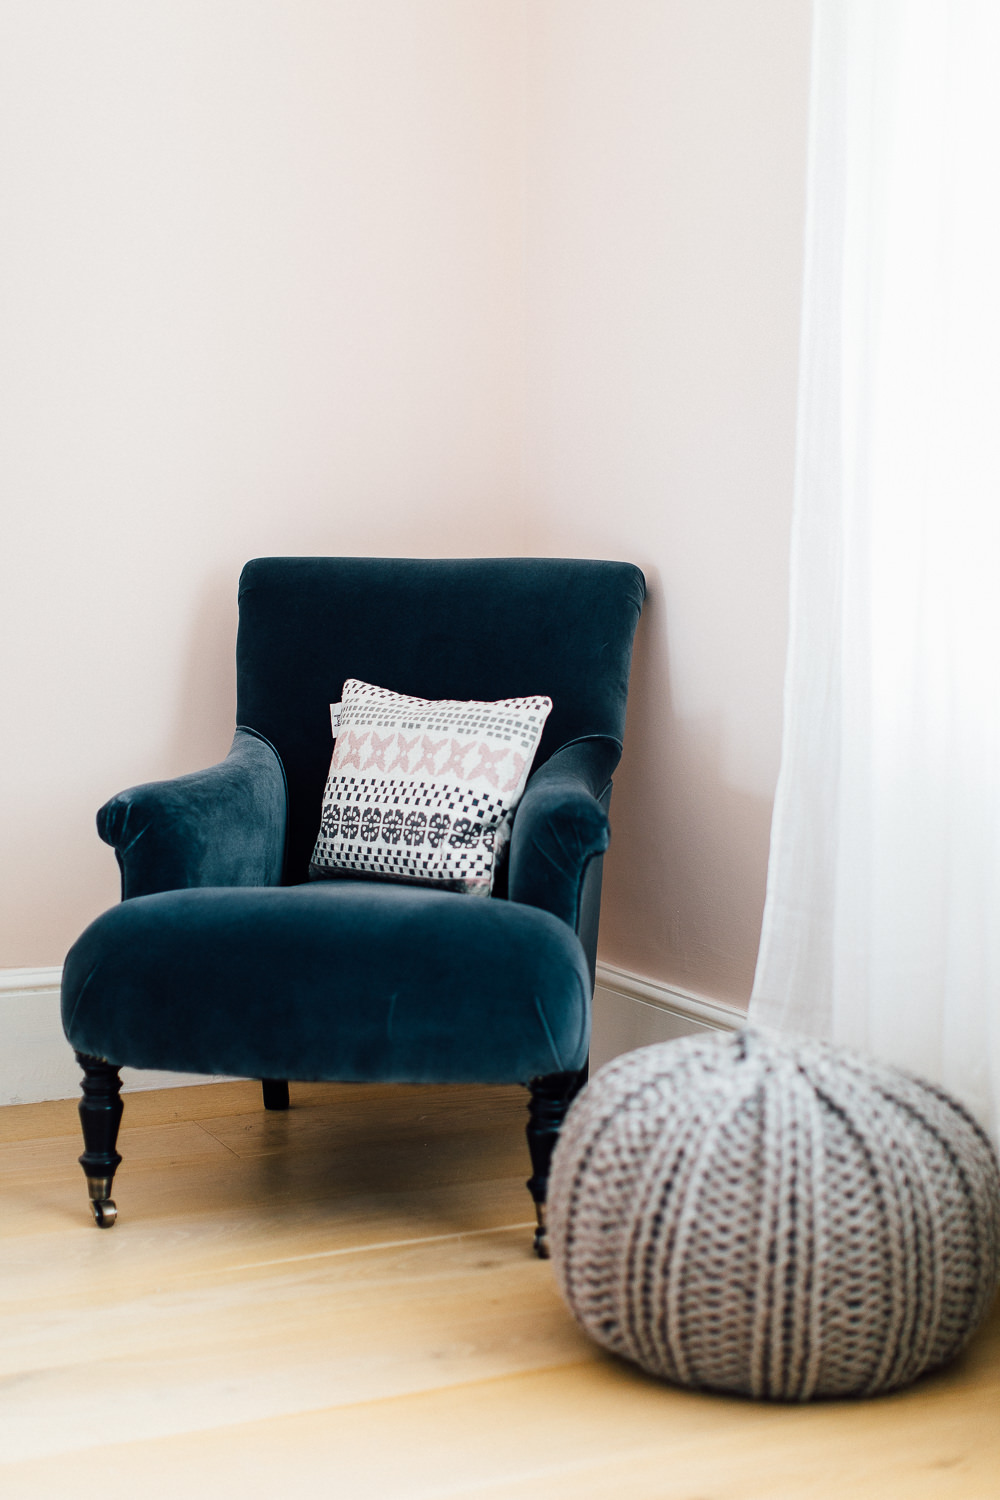 Statement velvet chair and grey pouffe